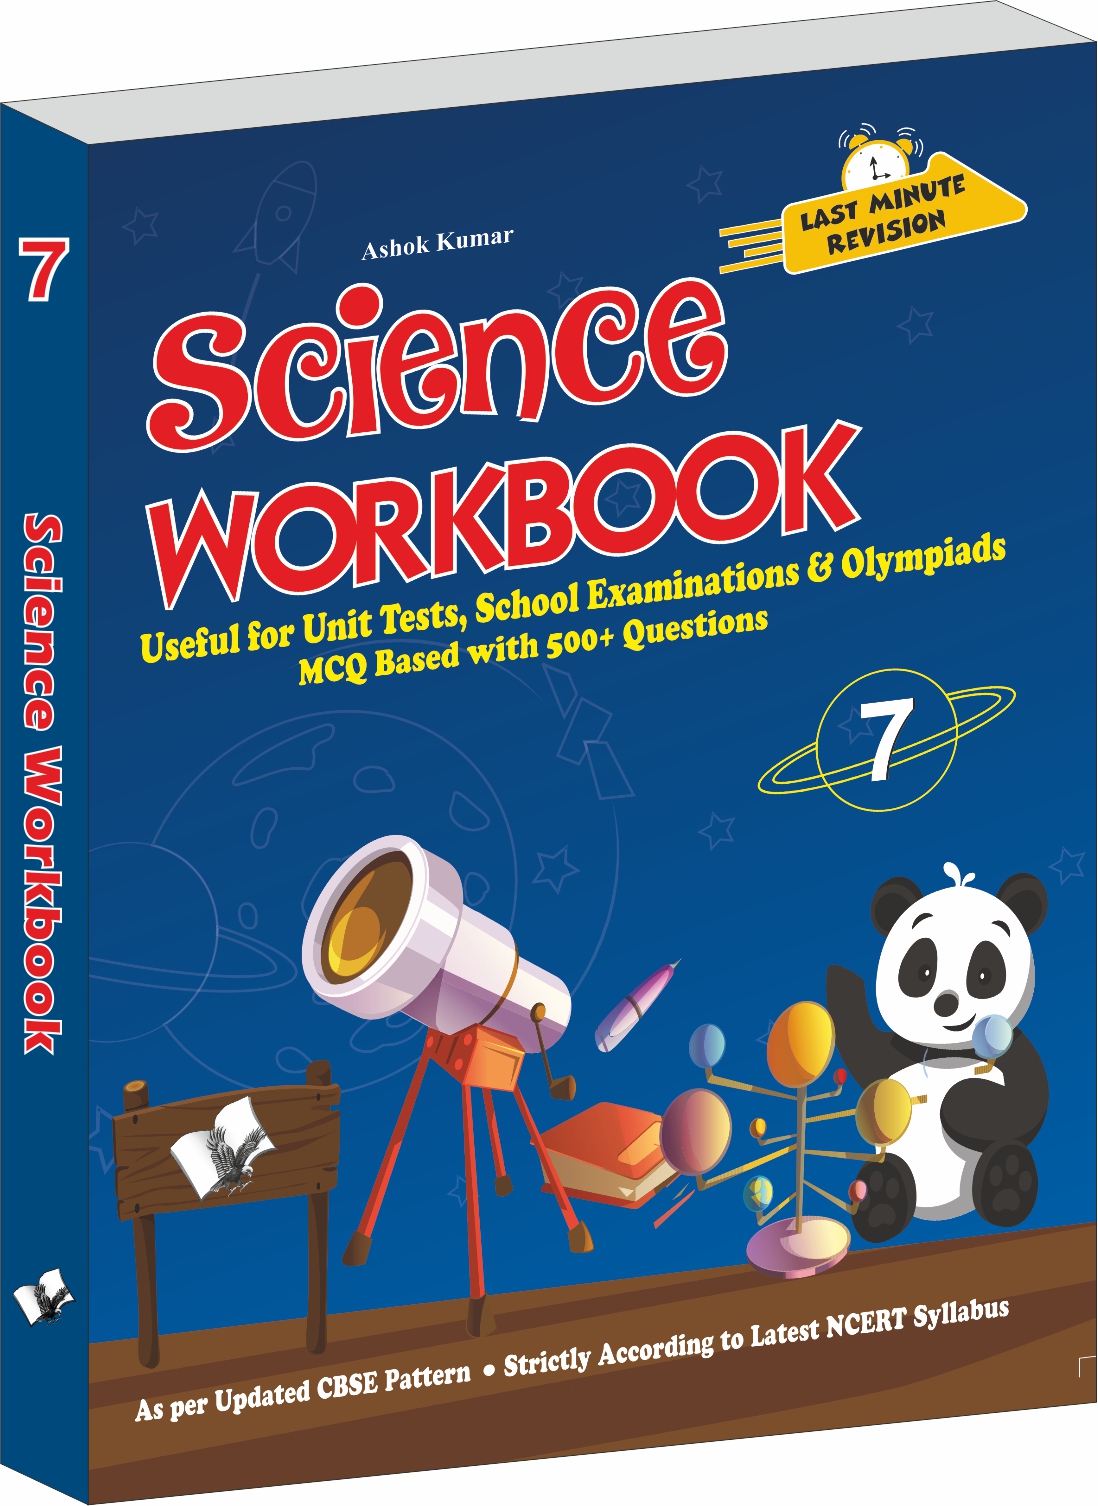 science-workbook-class-7-useful-for-unit-tests-school-examinations-olympiads